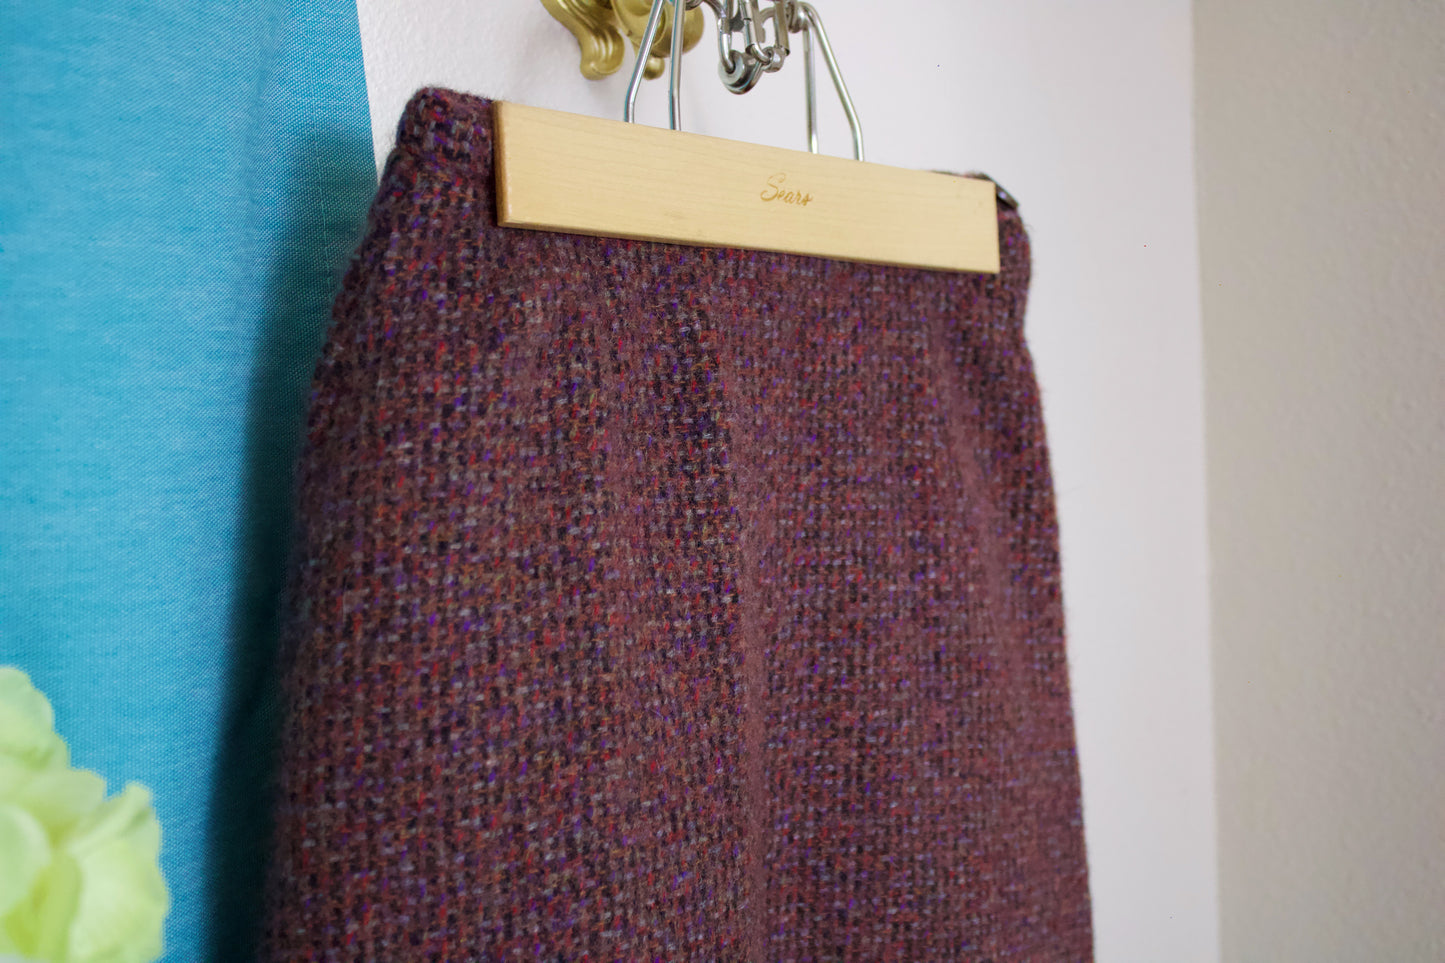 1960s Fredrick and Nelson Wool Skirt with Button Metal Zipper Fastener in Multicolor Tweed